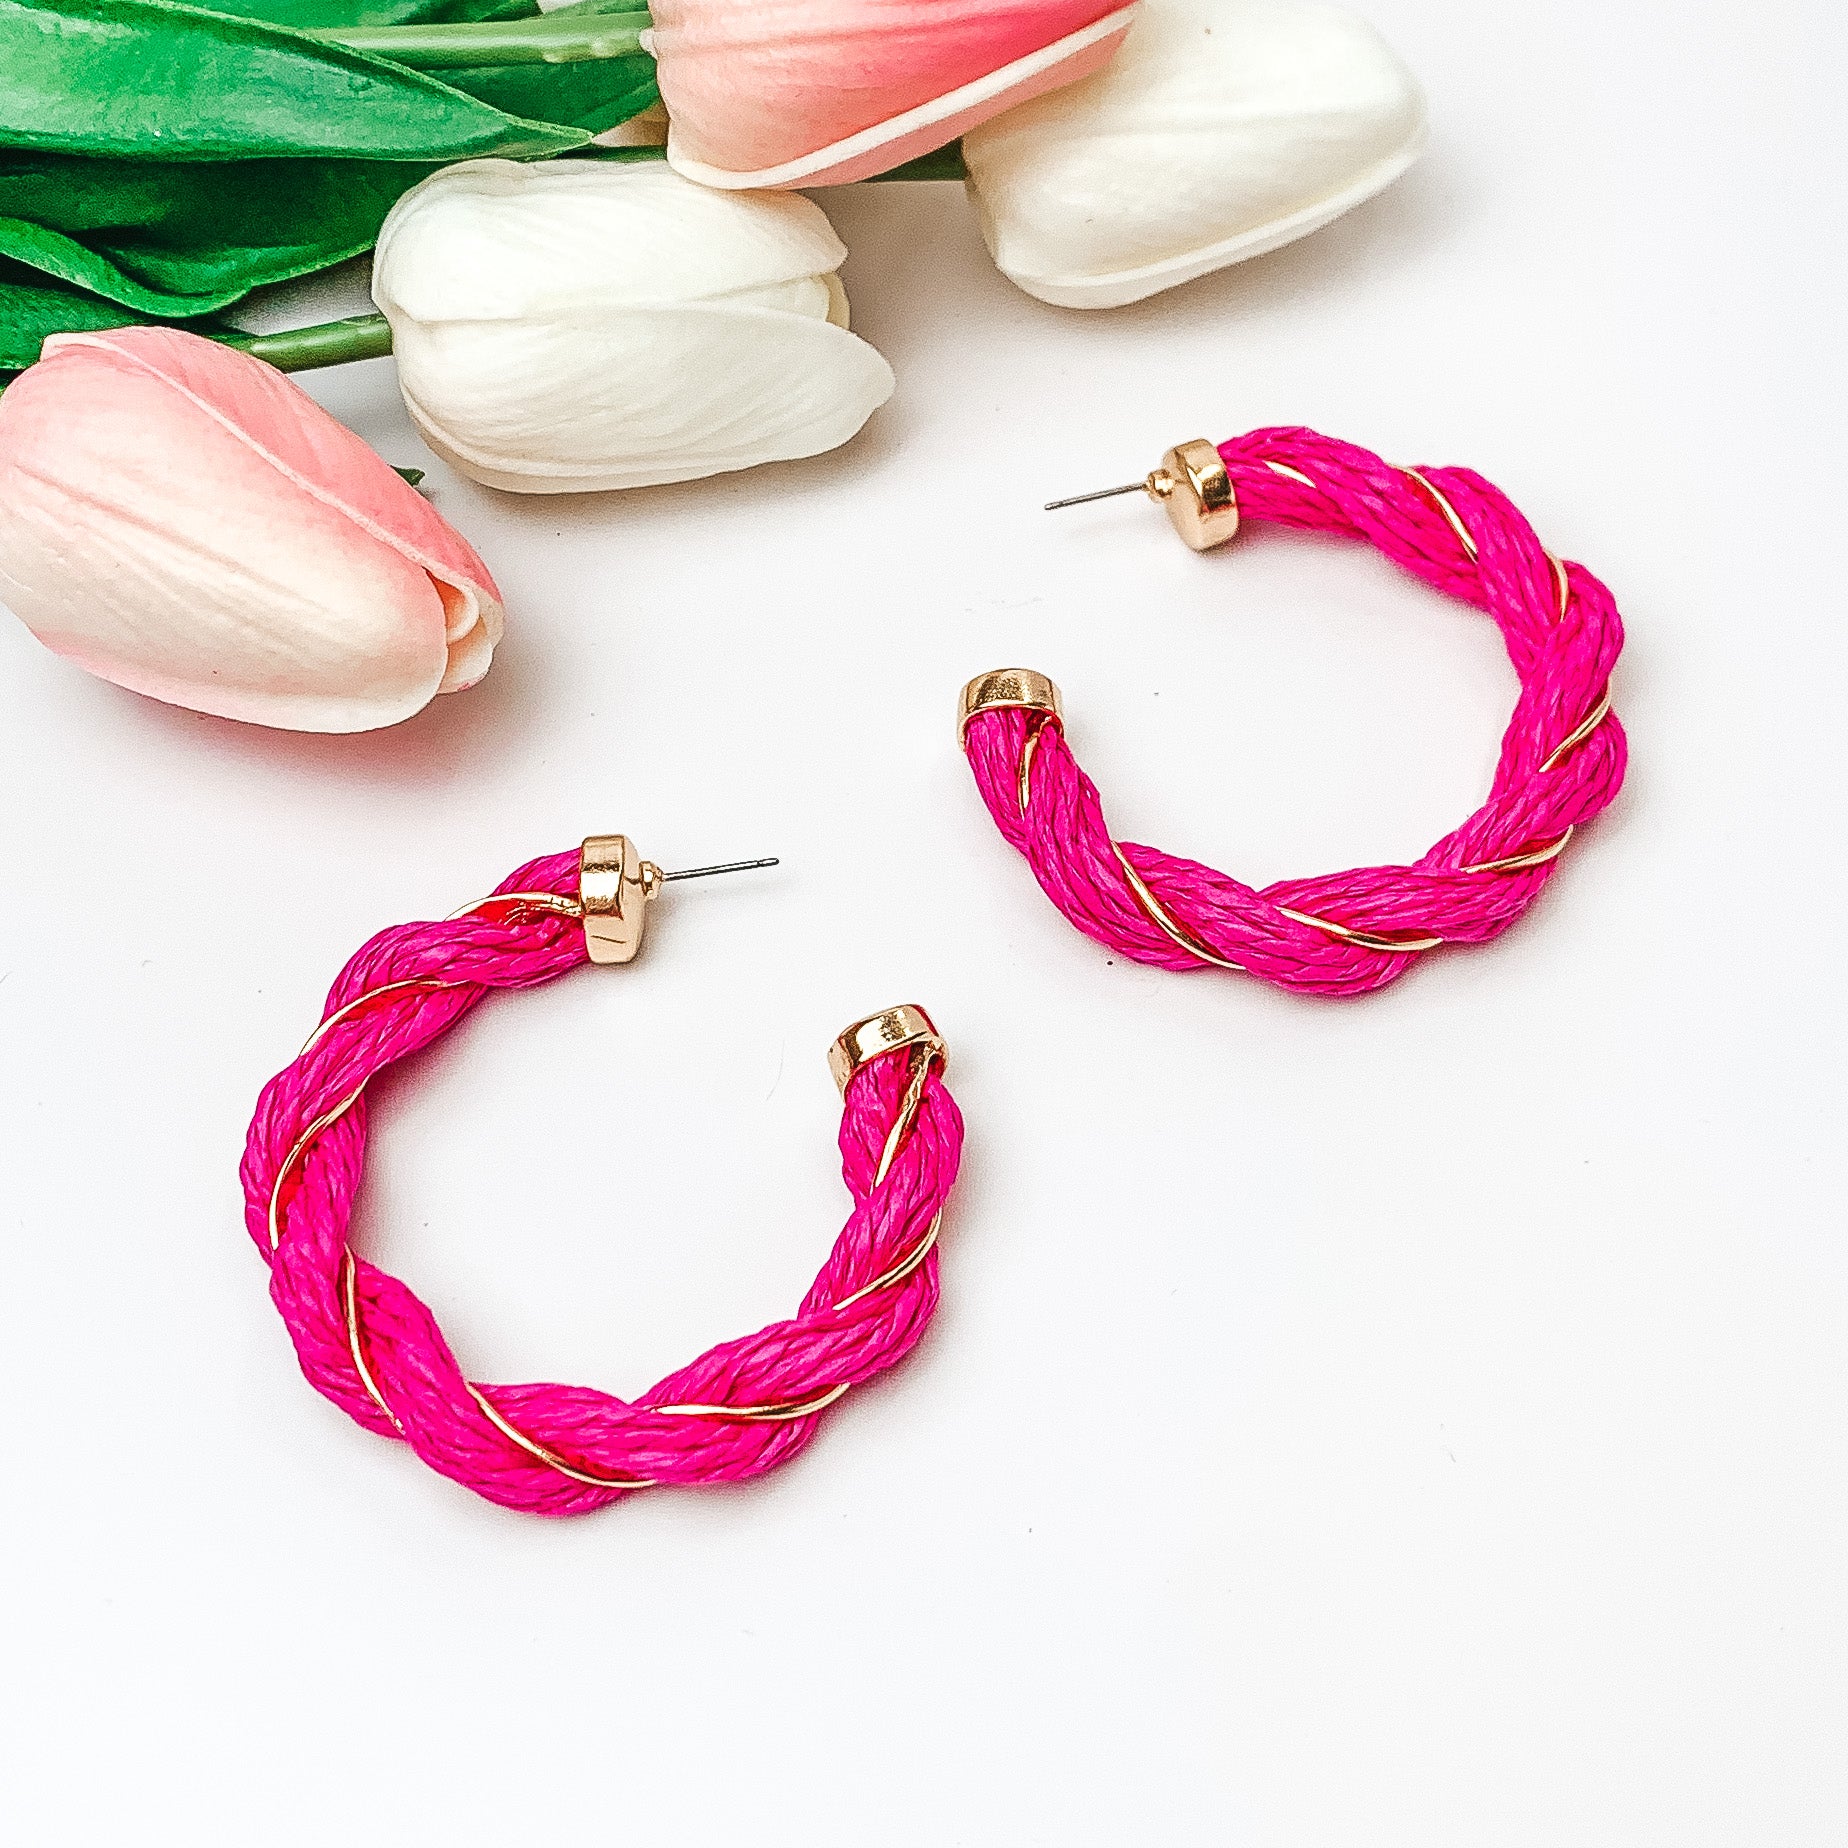 Pictured are fuchsia raffia twisted hoop earrings with gold detailing.  They are pictured with pink and white tulips on a white background.